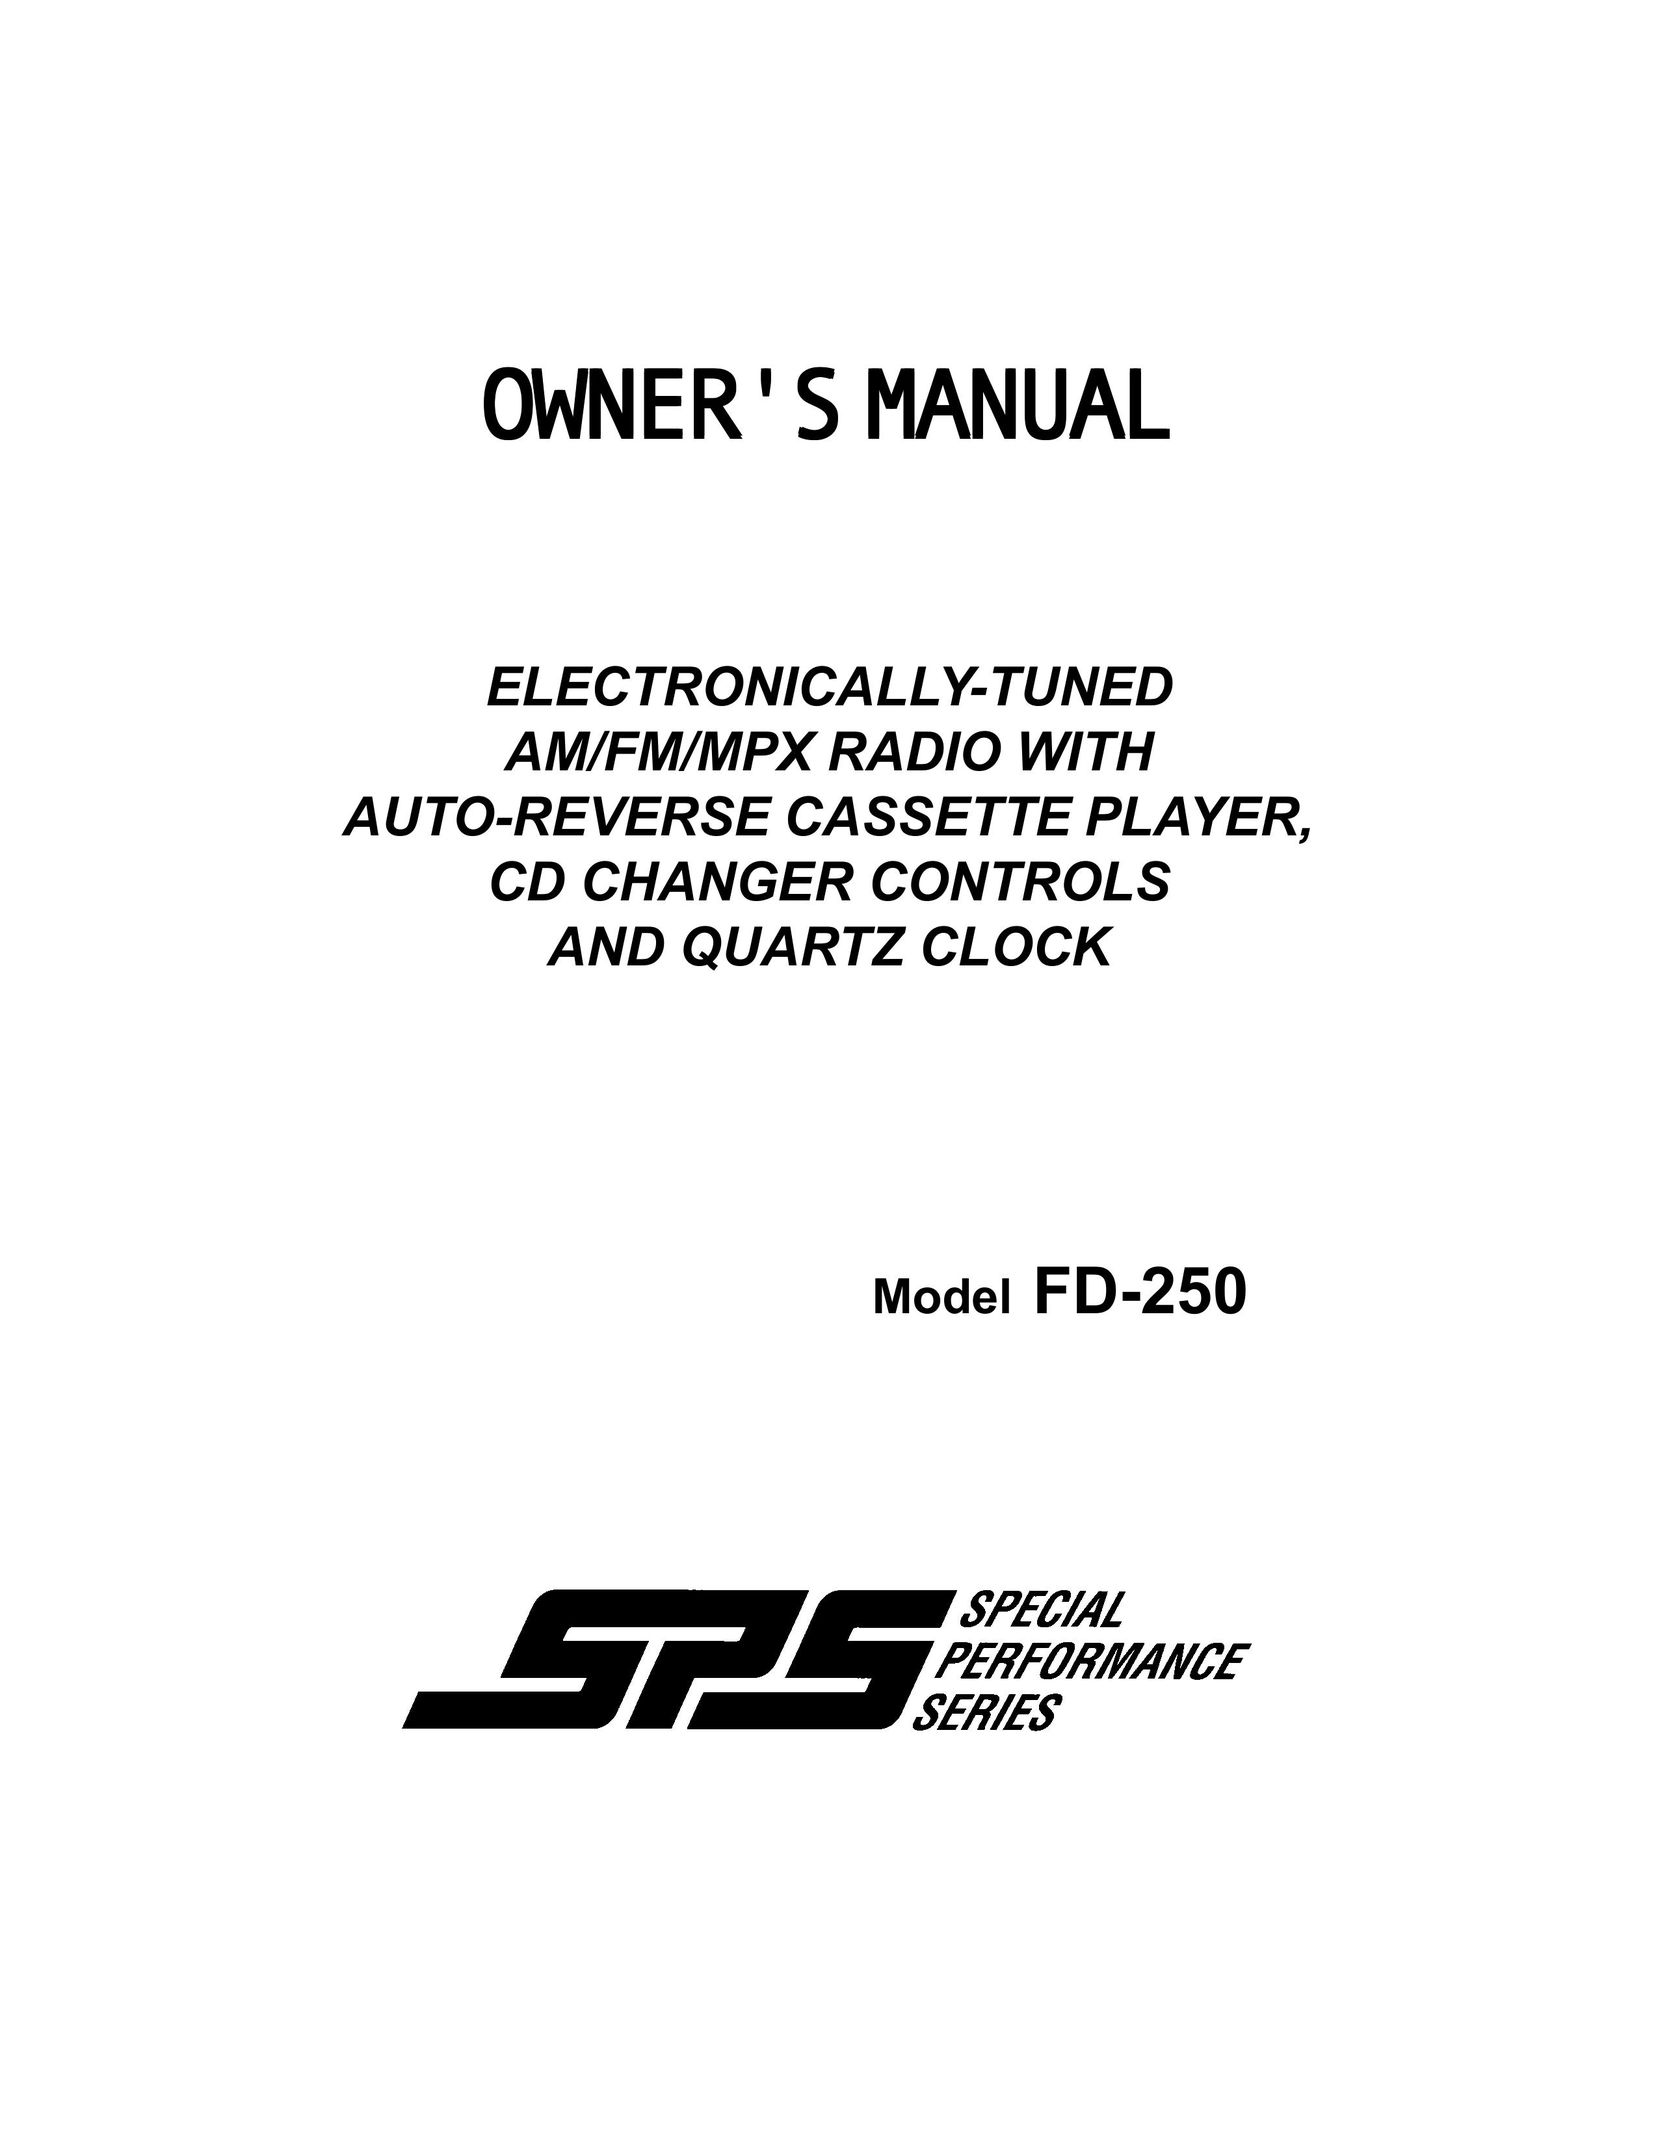 Audiovox FD-250 Stereo System User Manual